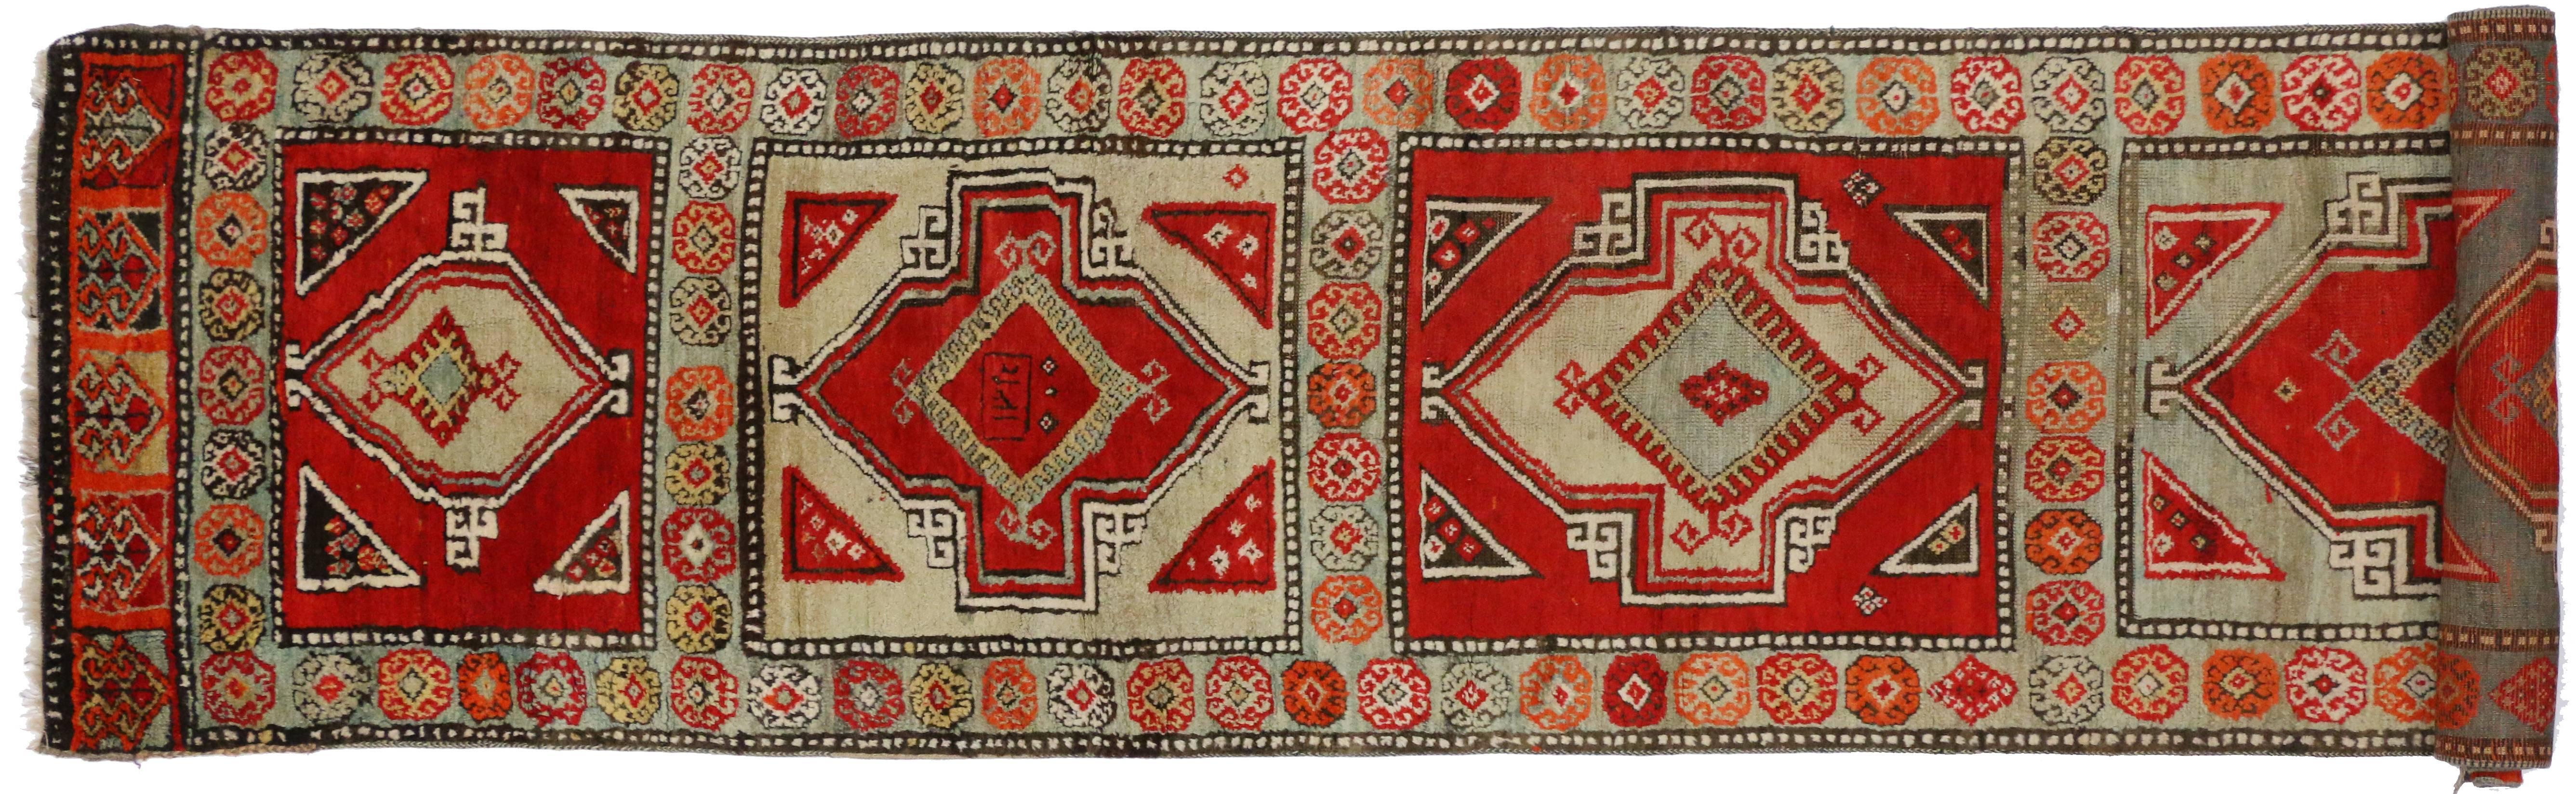 Wool Vintage Turkish Oushak Runner with Eclectic Mediterranean Style